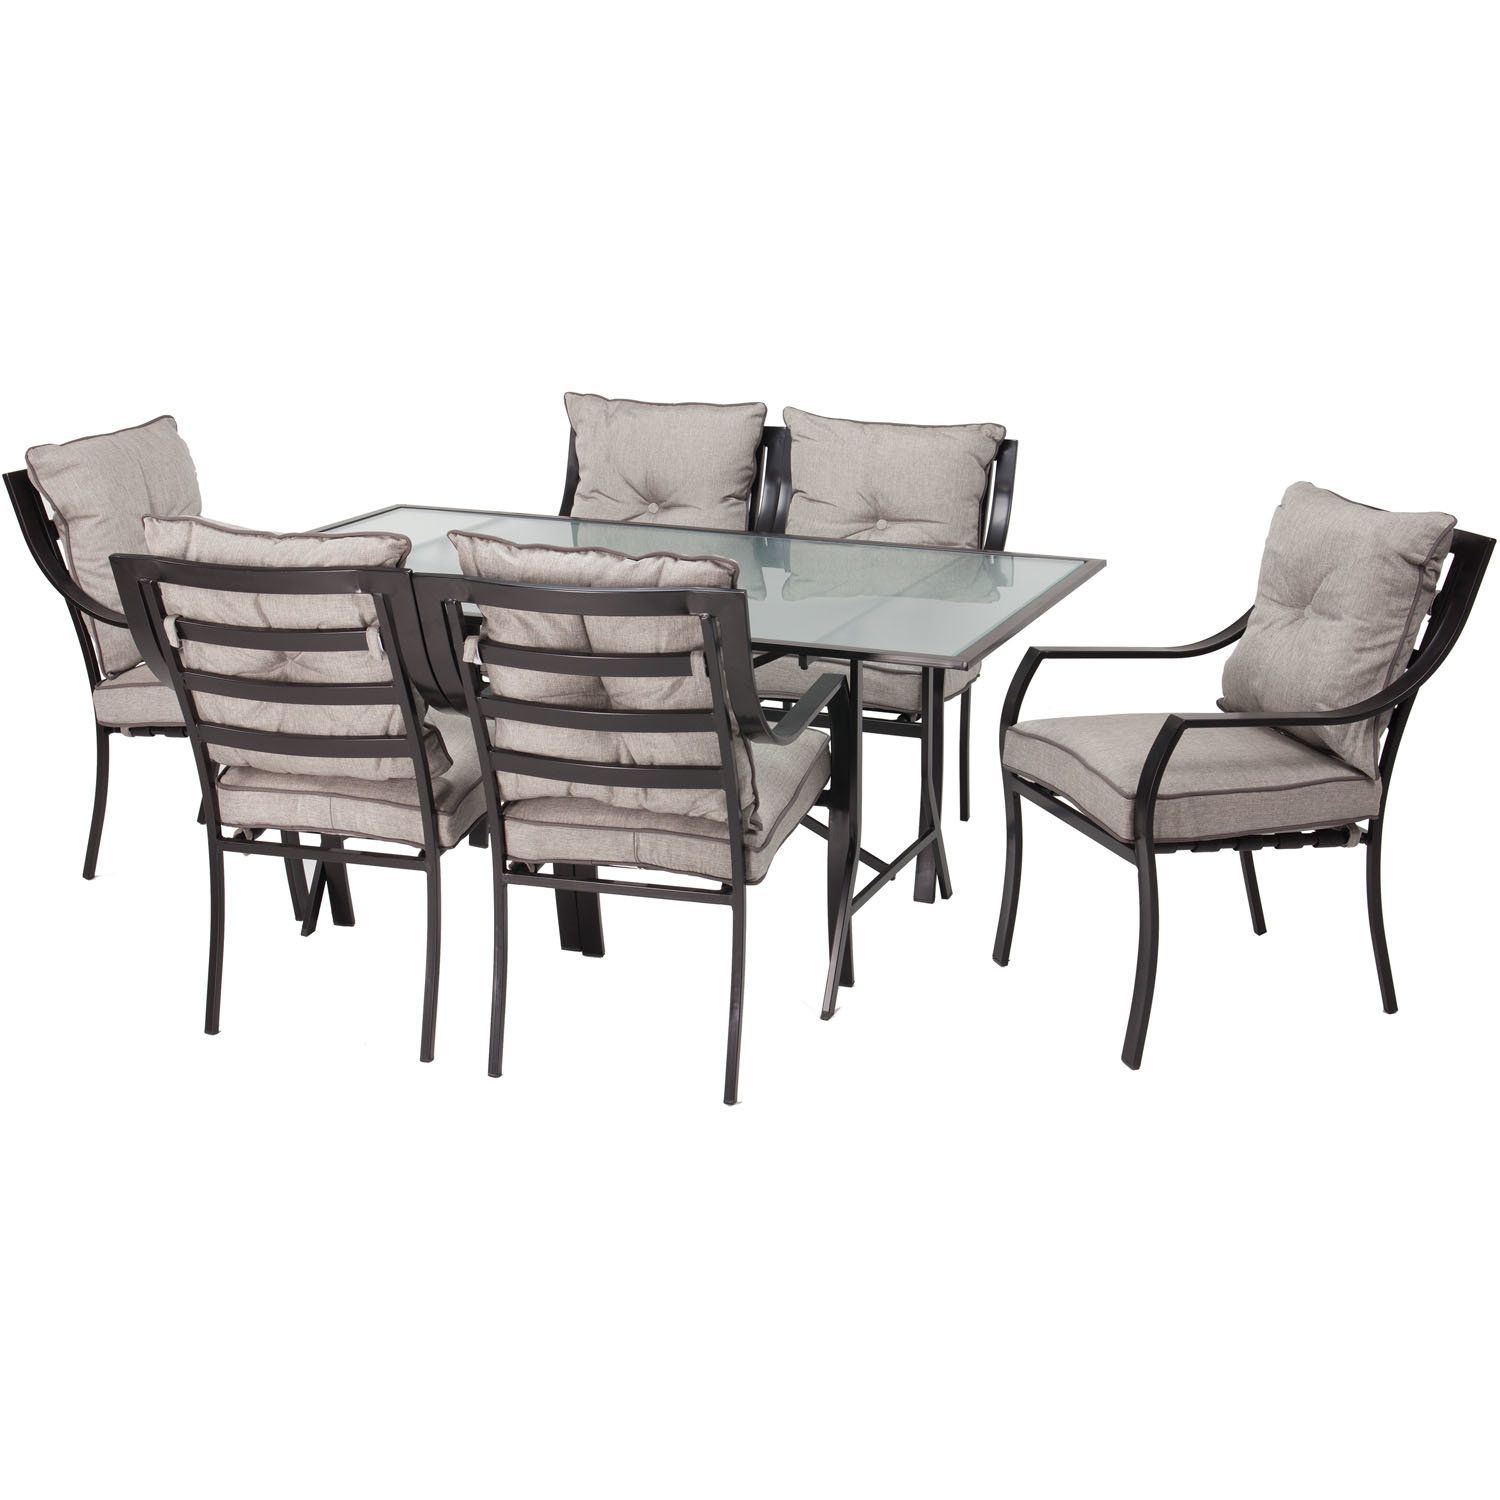 Darby Home Co Bozarth 7 Piece Dining Set With Cushion In Recent Miskell 5 Piece Dining Sets (View 16 of 20)